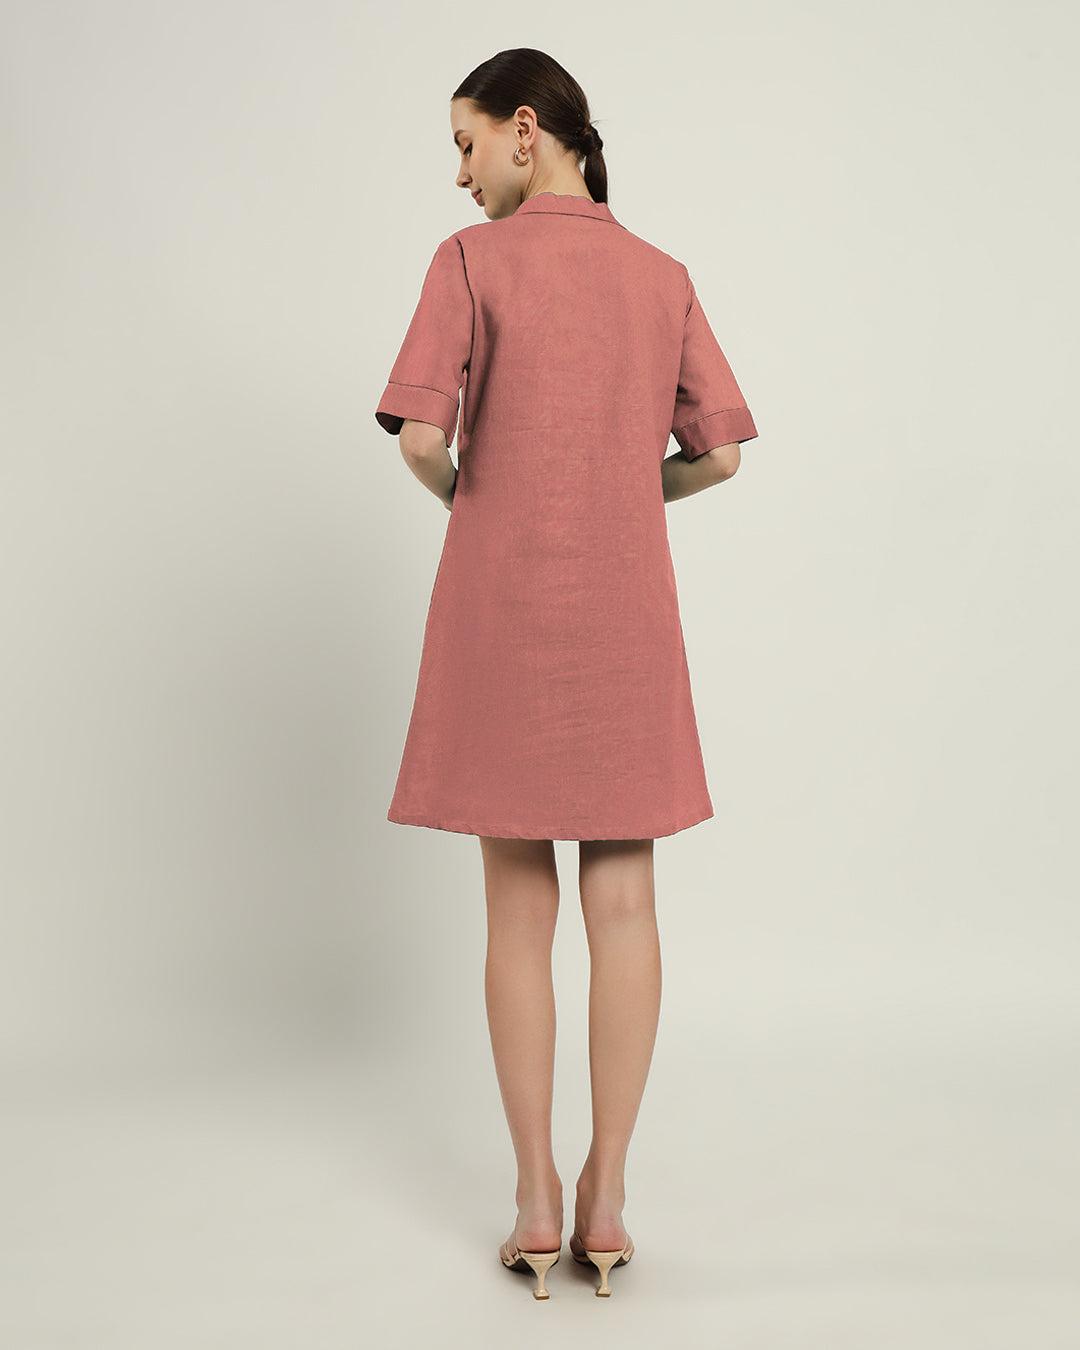 The Ermont Ivory Pink Dress